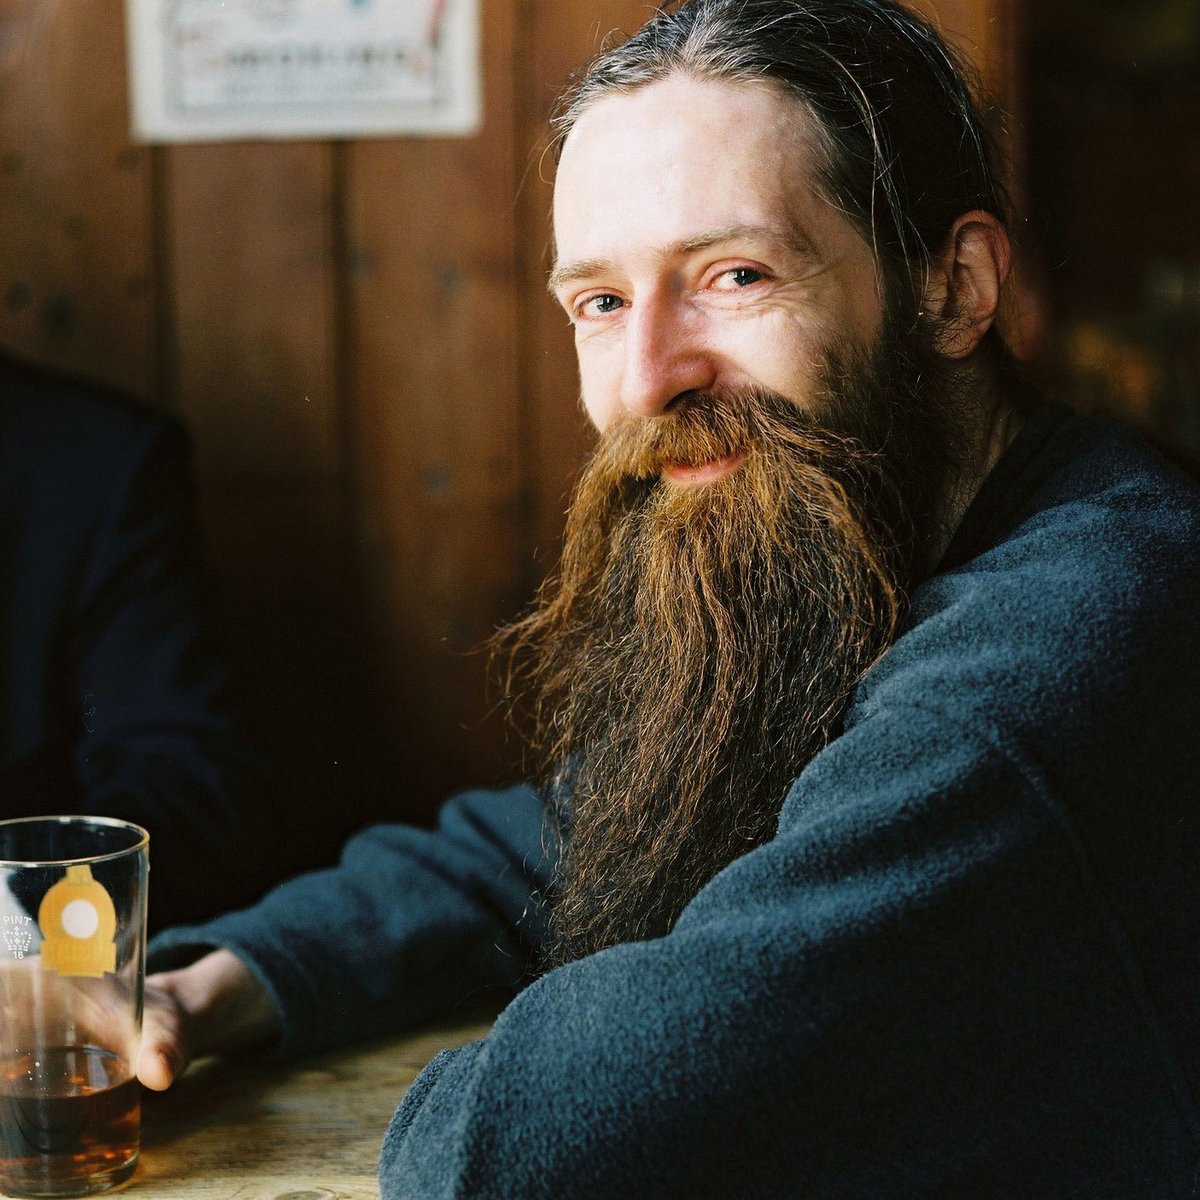 27) In 2009, Aubrey de Grey, a biogerontologist and high-profile advocate for life-extension, founded the SENS Research Foundation to pursue research into curing aging. He received backing from The Thiel Foundation. https://www.fightaging.org/archives/2009/09/the-thiel-foundation/